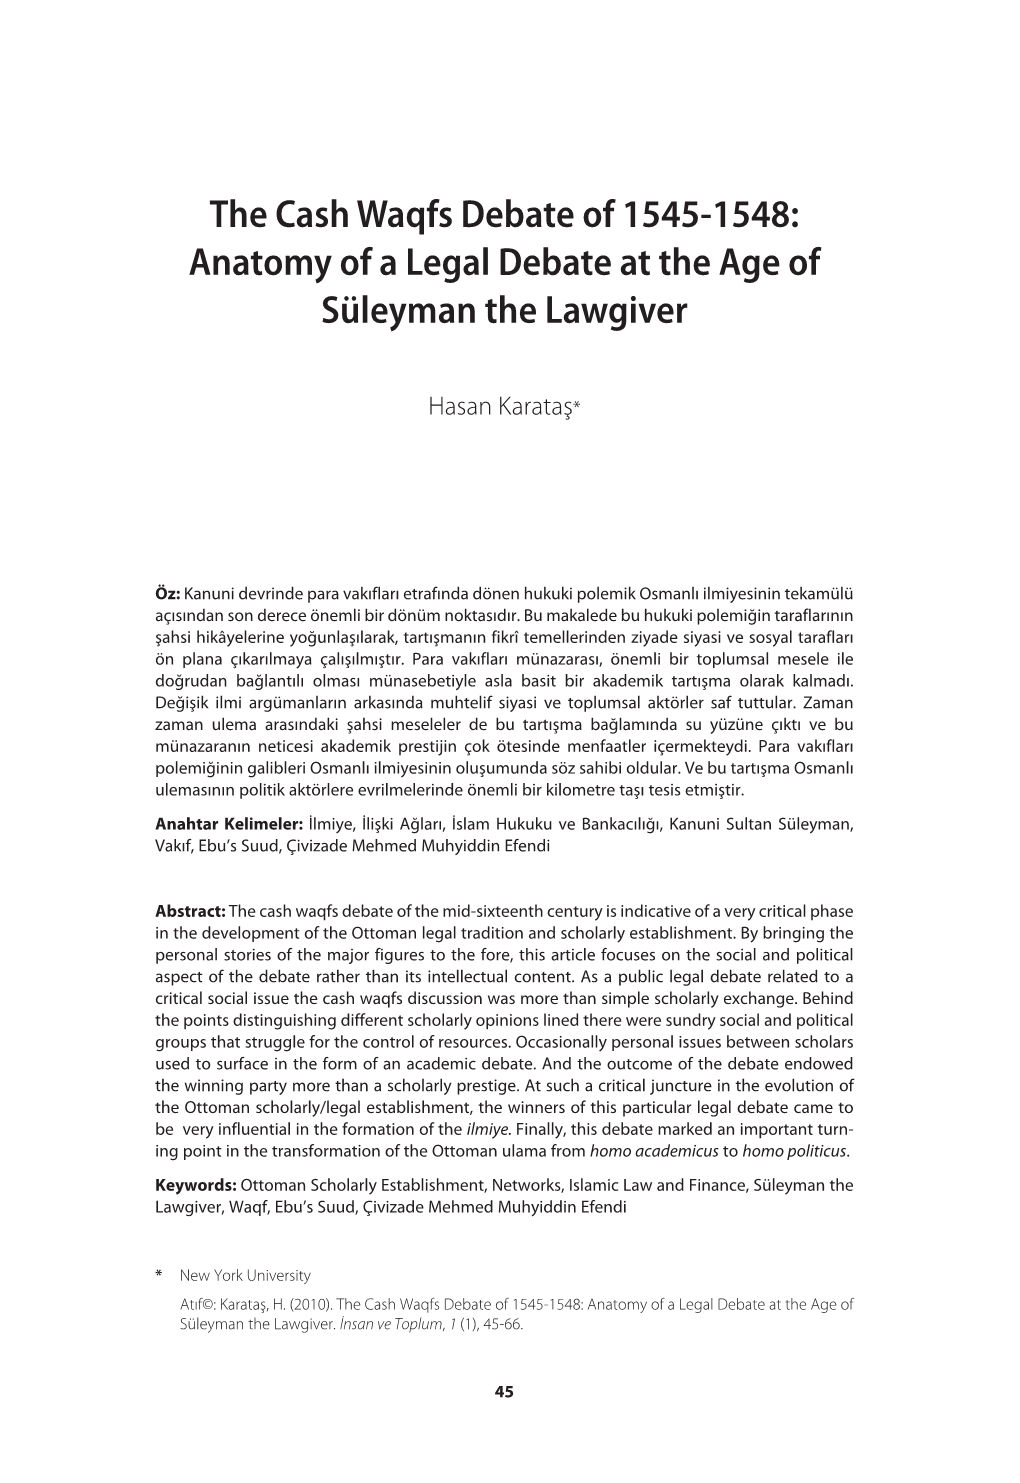 The Cash Waqfs Debate of 1545-1548: Anatomy of a Legal Debate at the Age of Süleyman the Lawgiver